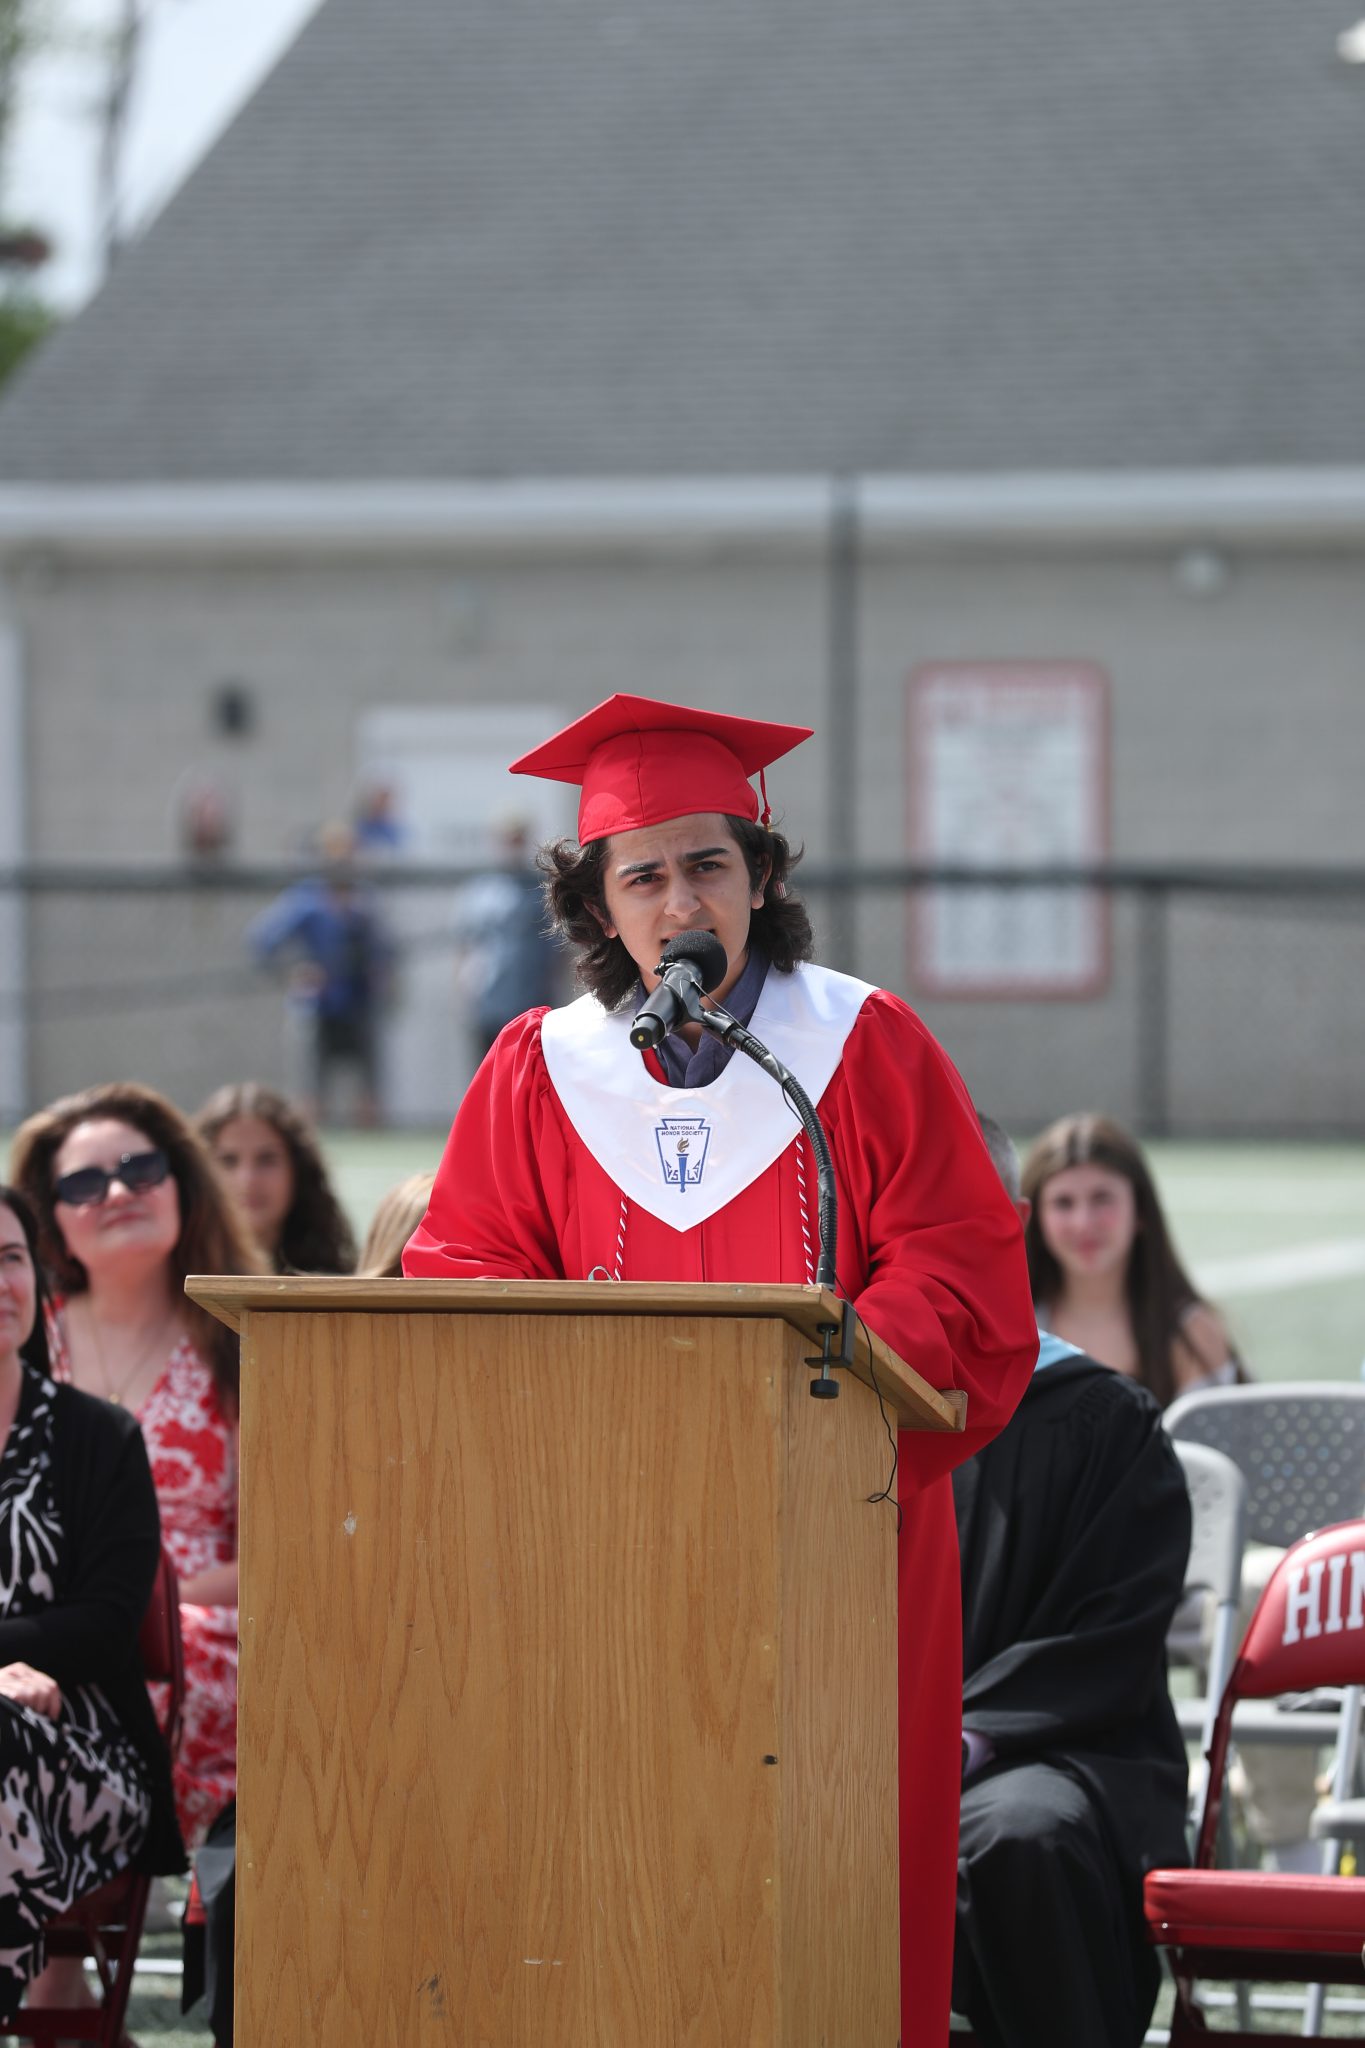 Valedictorian Dominic Kanter reflected on his four years at Hingham High School.